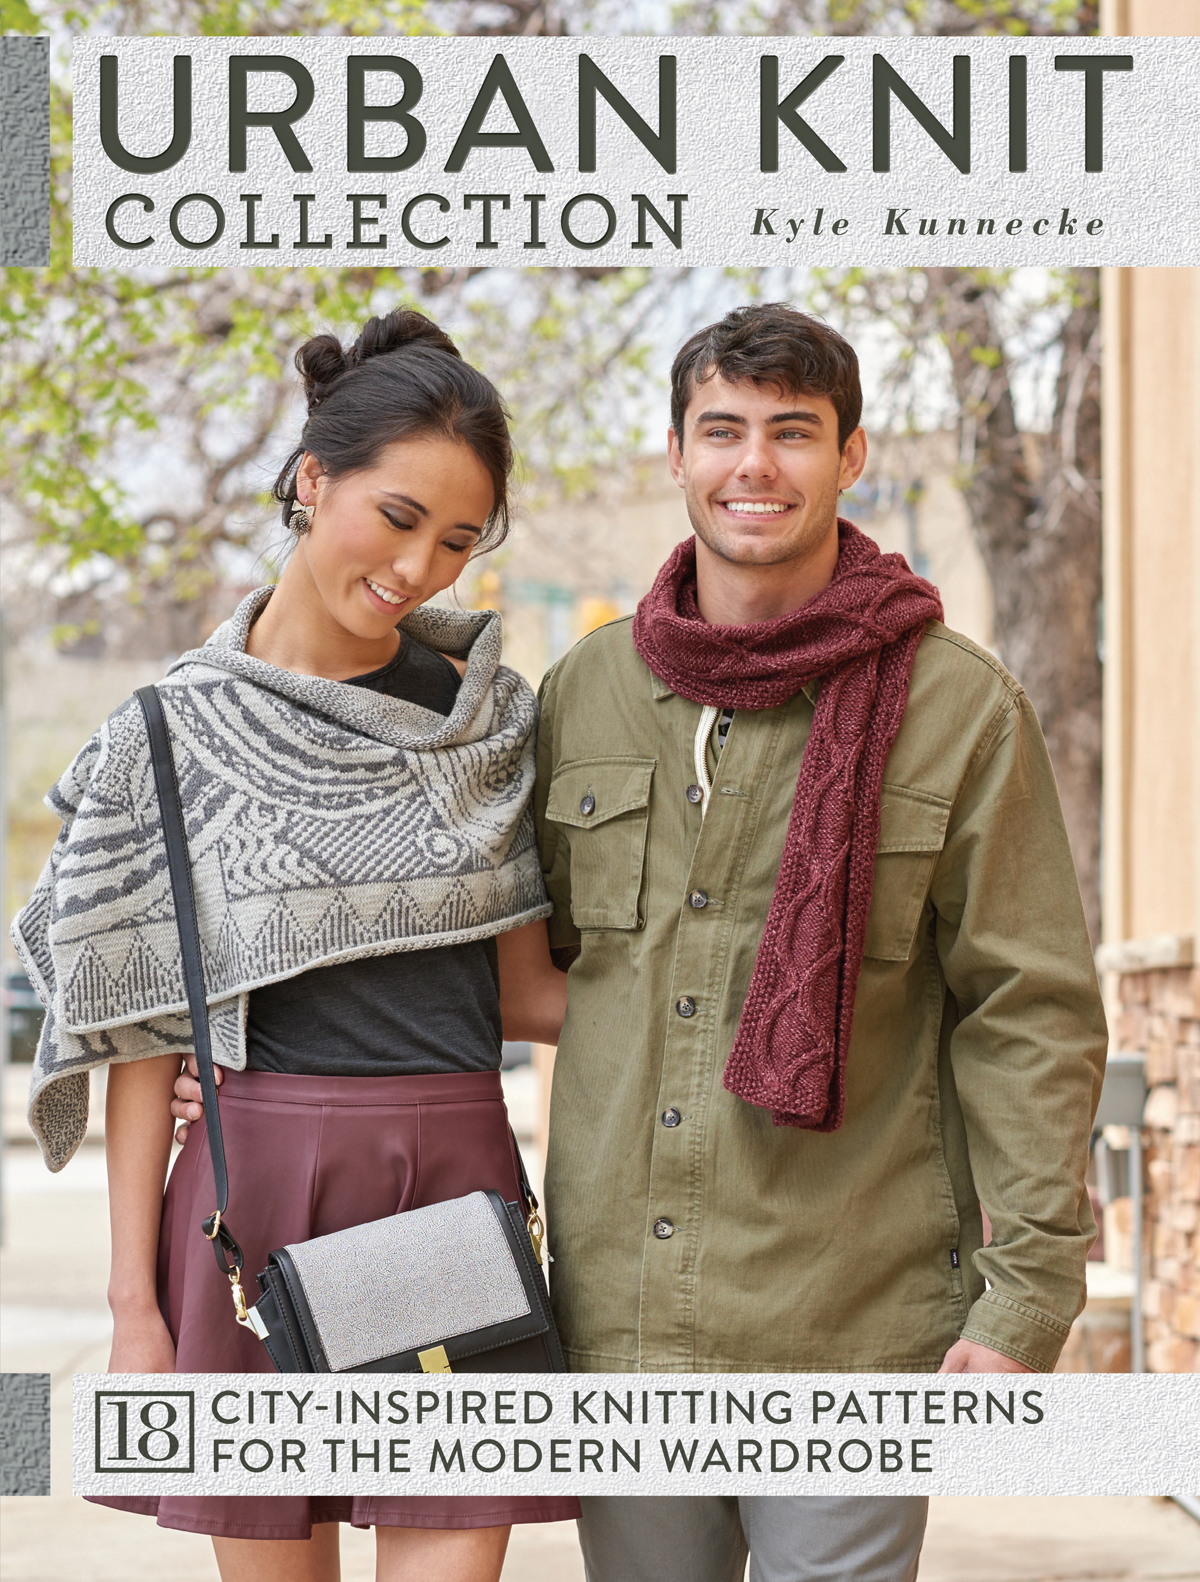 CITY-INSPIRED KNITTING PATTERNS FOR THE MODERN WARDROBE by Kyle Kunnecke - photo 1